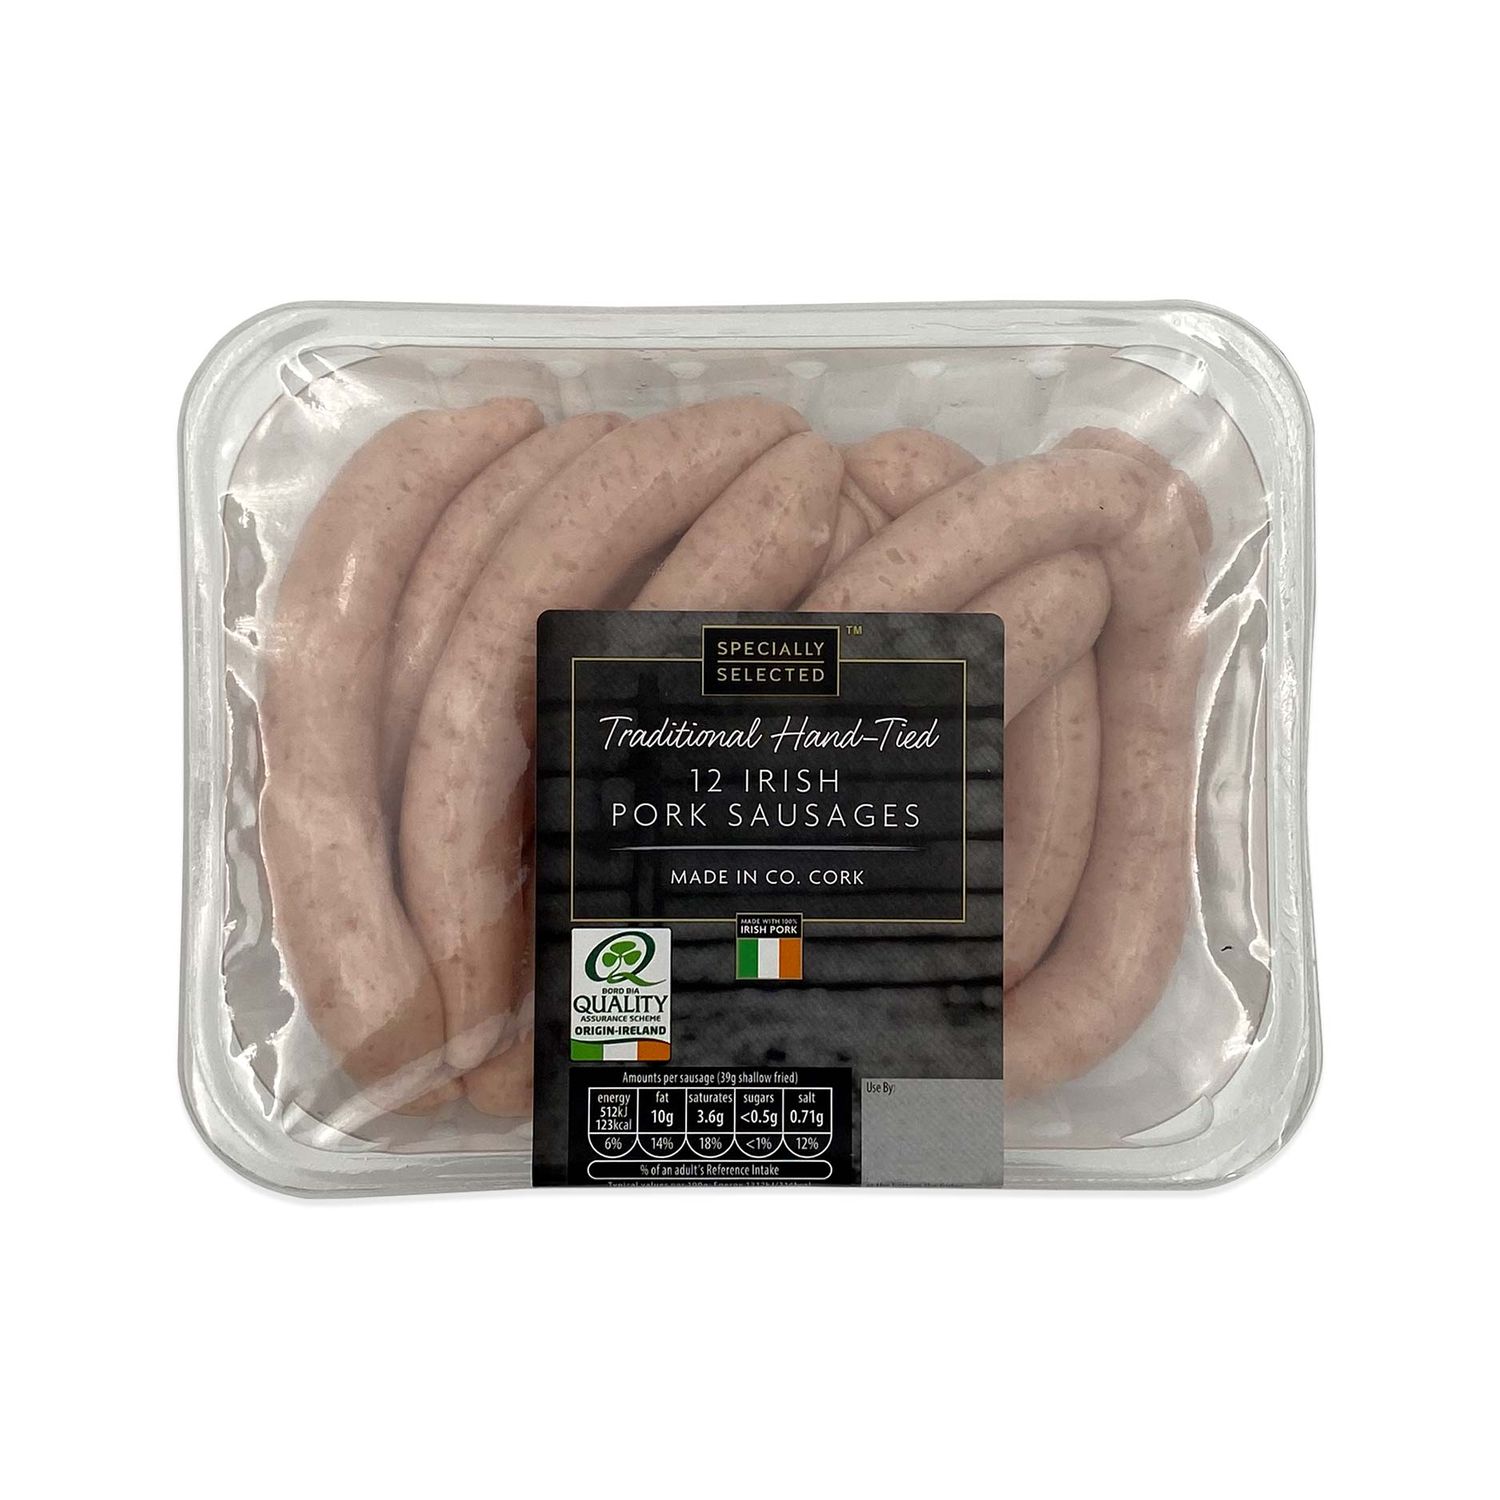 Traditional Hand Tied 12 Irish Pork Sausages 492g Specially Selected Aldi Ie